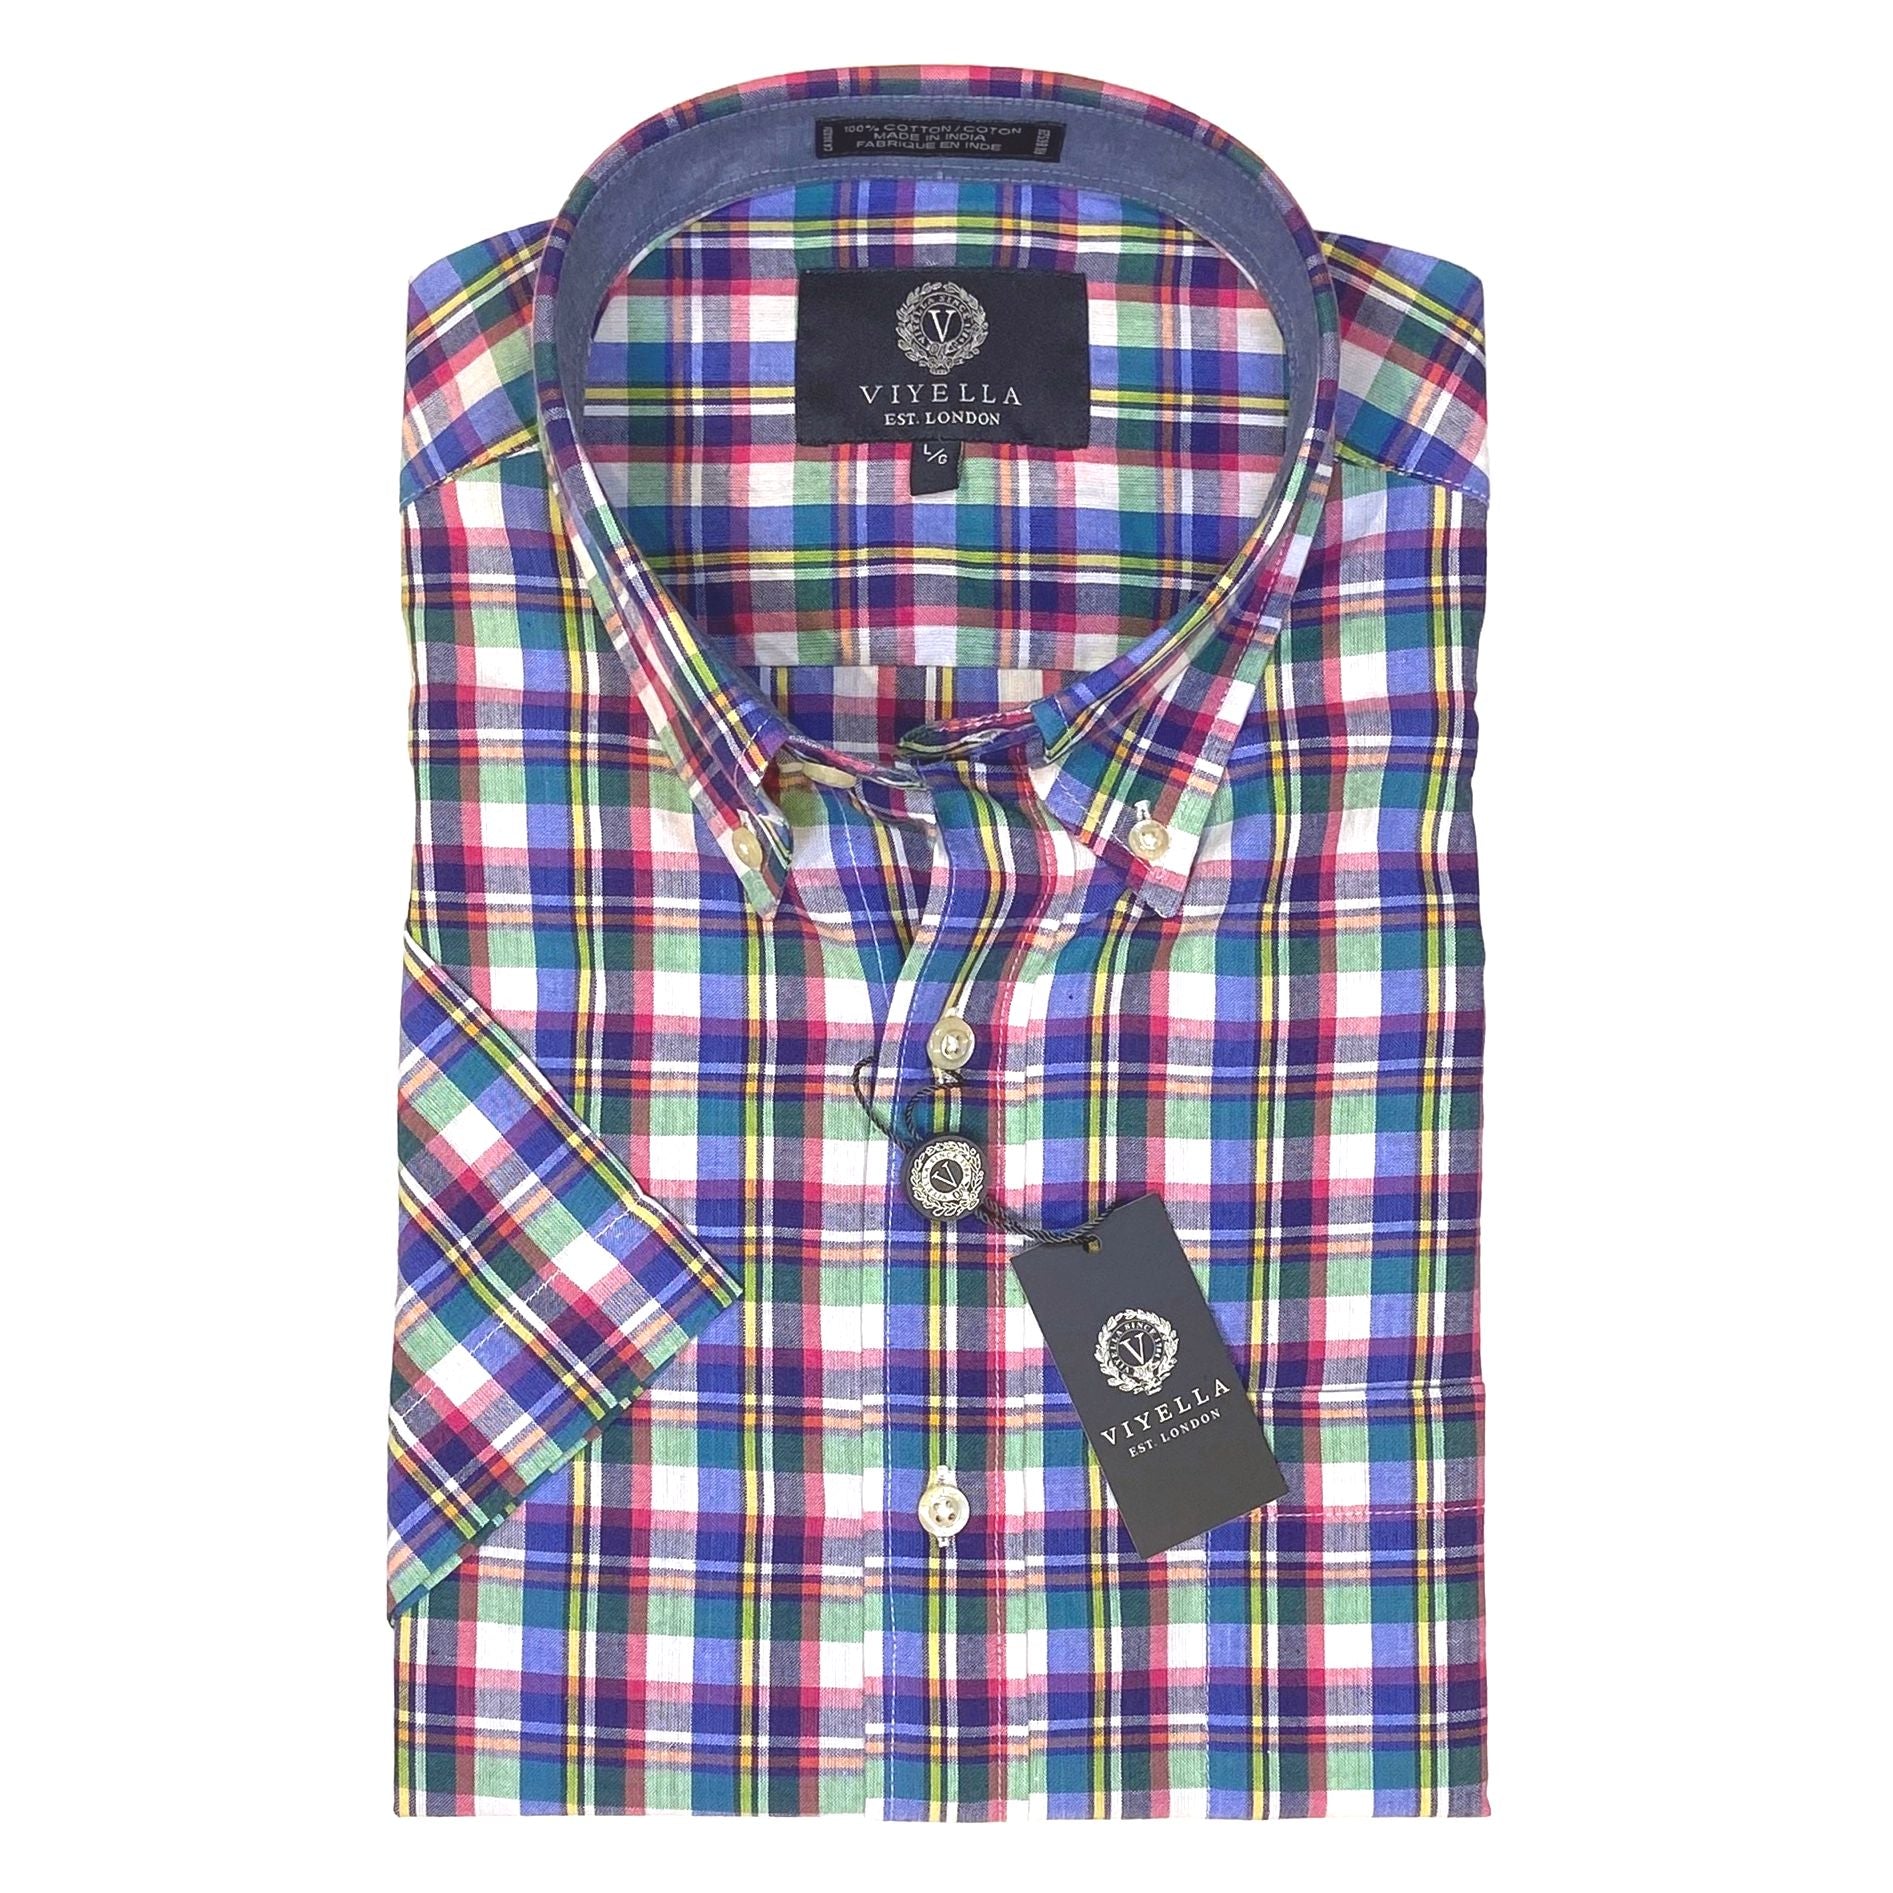 Cotton Madras Short Sleeve Cotton Sport Shirt in Blue, Green, and Rose Plaid by Viyella